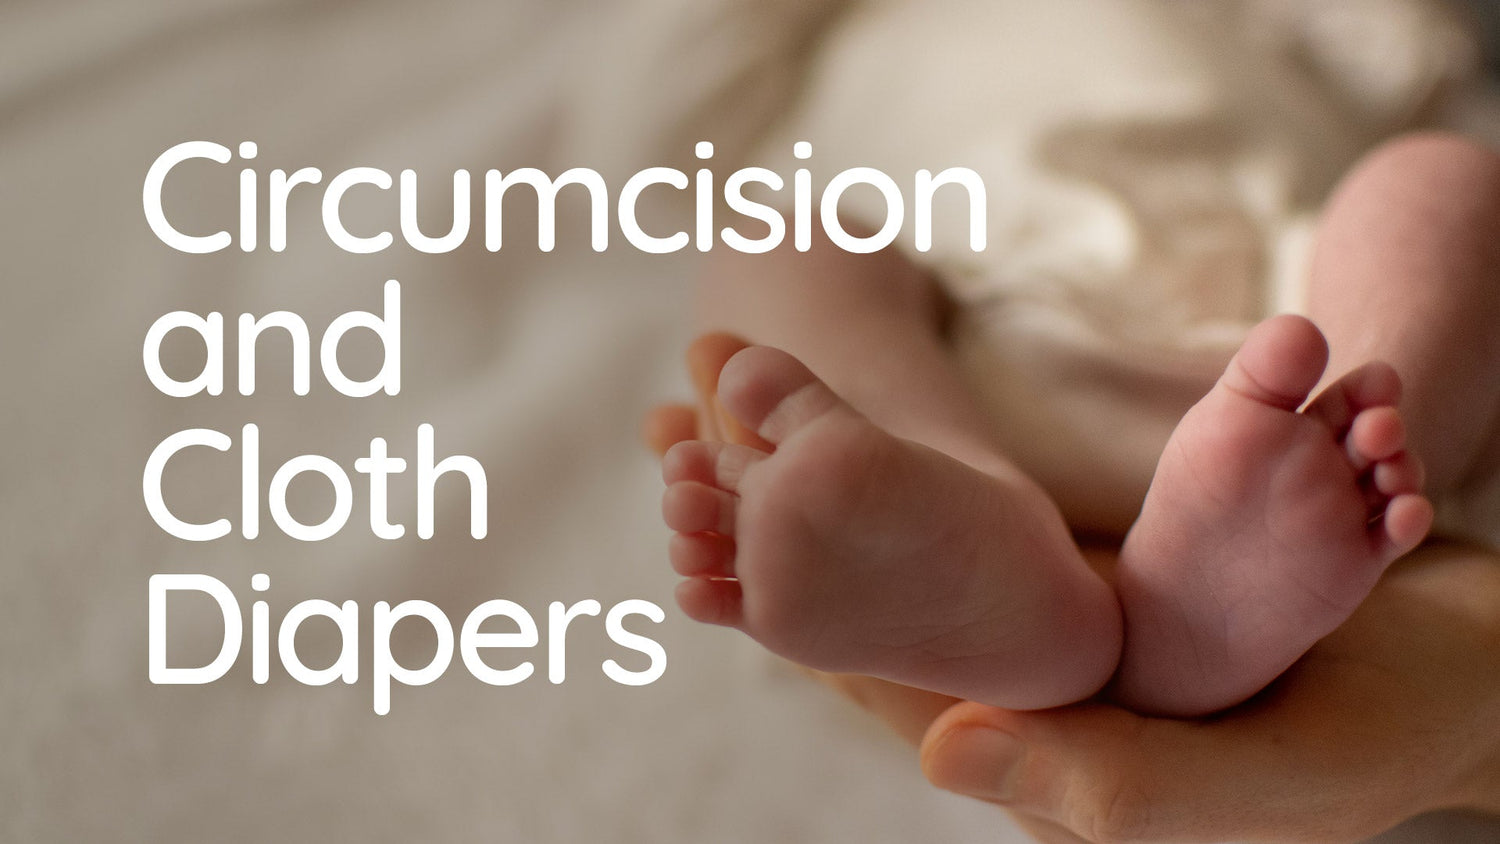 Dealing with Cloth Diapering with a Healing Circumcision Wound